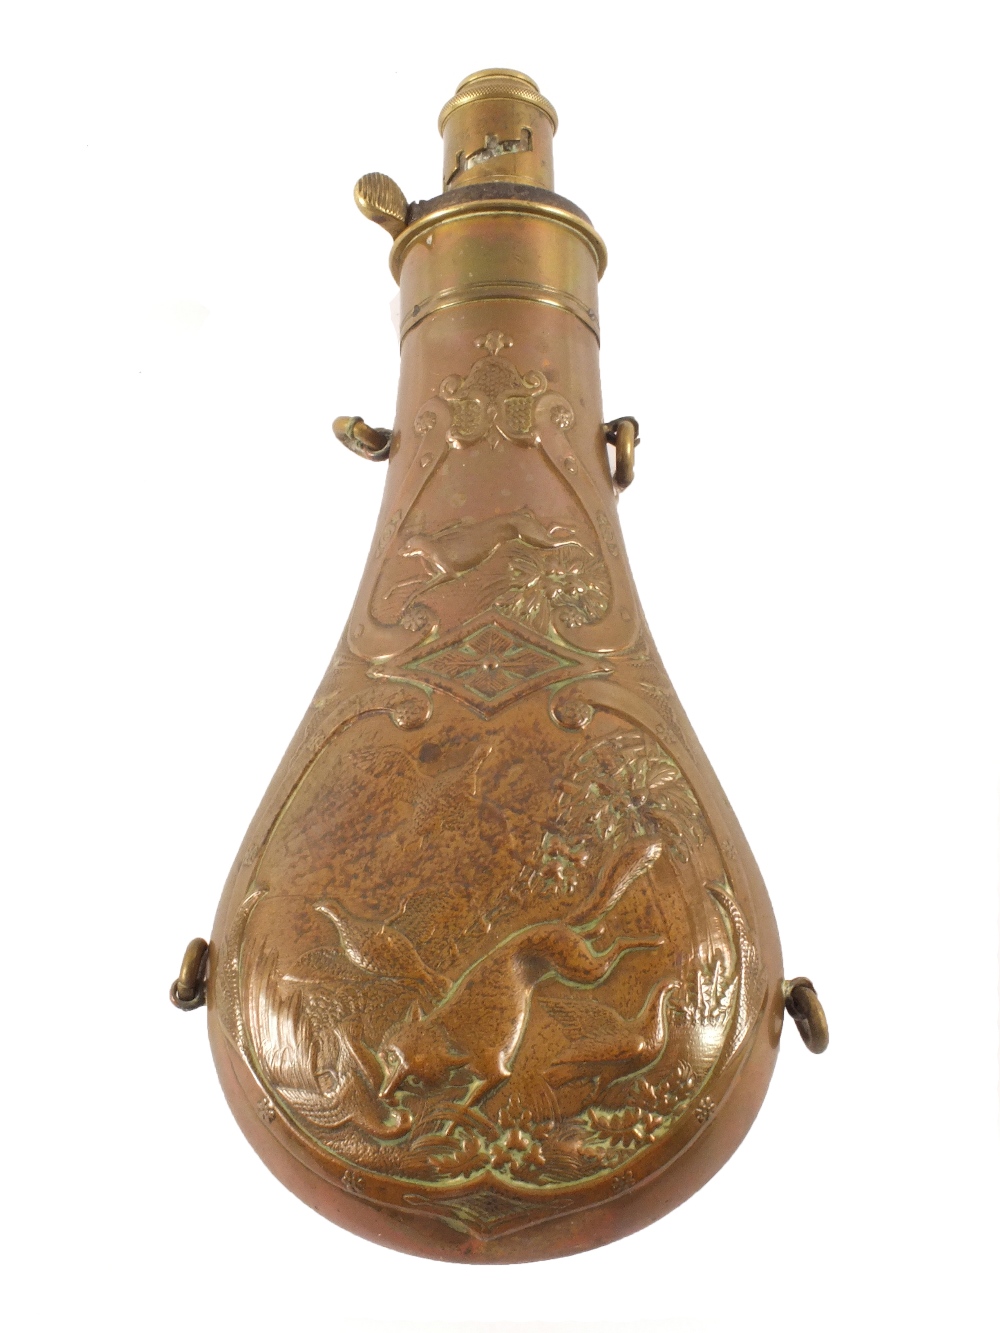 A mid 19th Century powder flask by Hawksley with embossed game birds and a fox